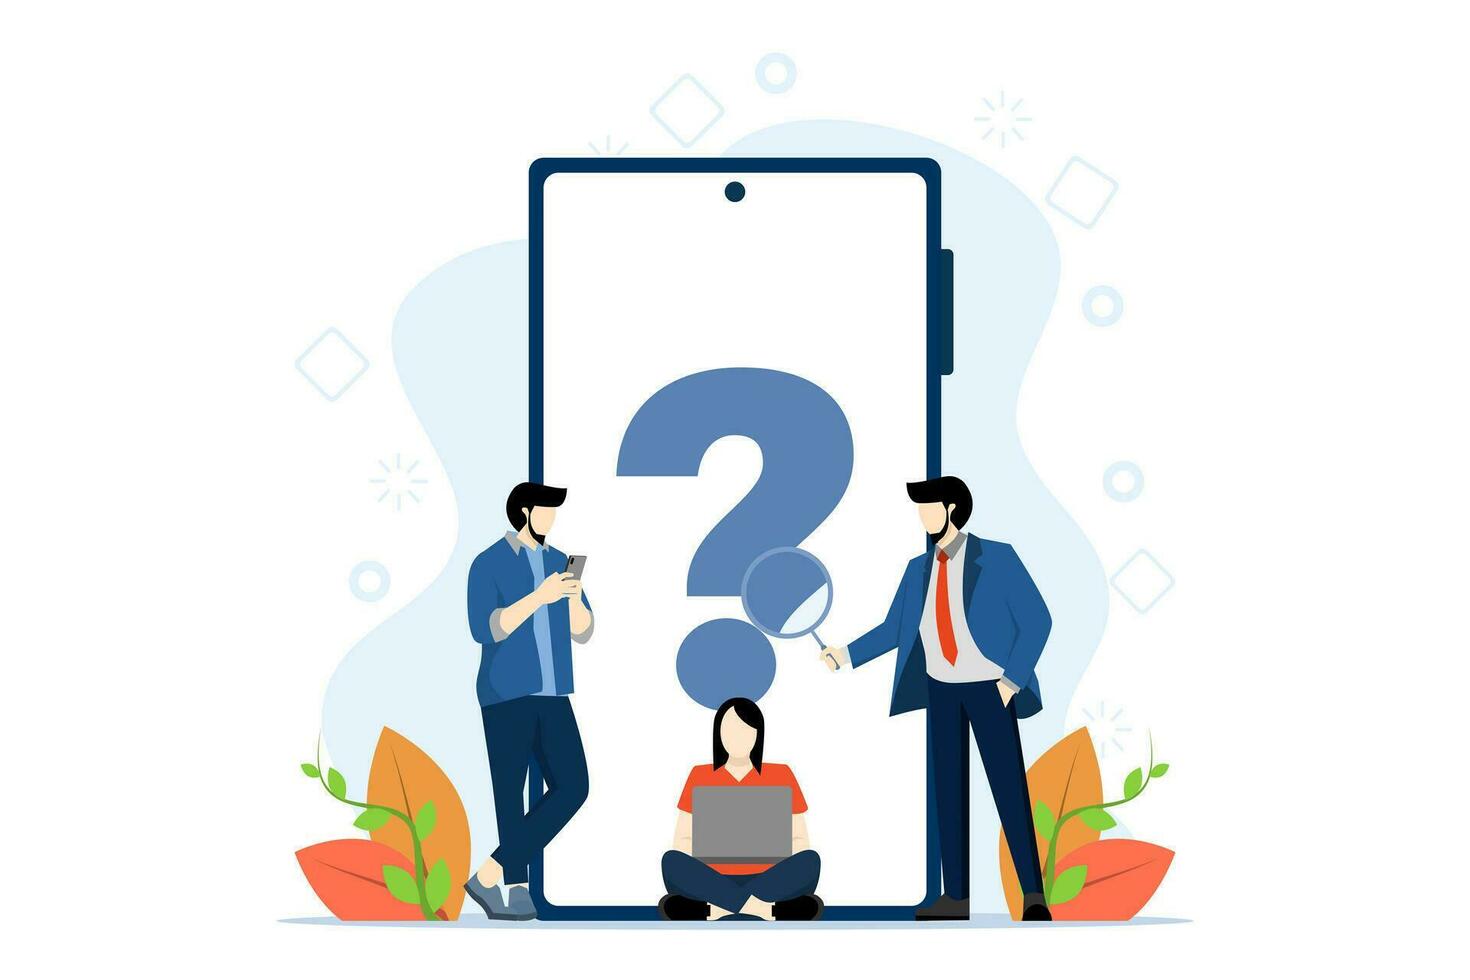 frequently asked questions concept, frequently asked questions around exclamation marks and question marks, question answer metaphor, FAQ for landing pages, mobile apps, web banners, infographics. vector